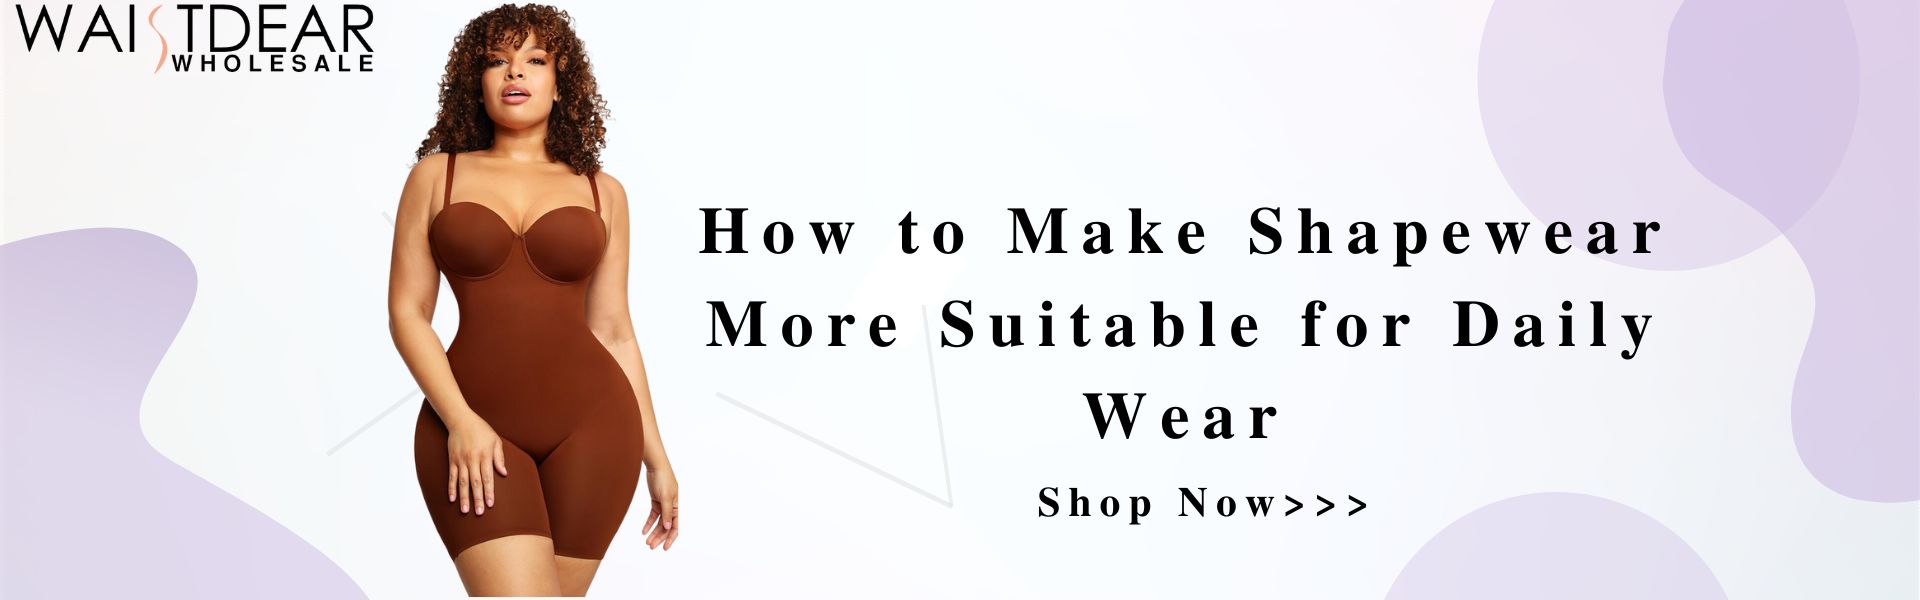 How to Make Shapewear More Suitable for Daily Wear